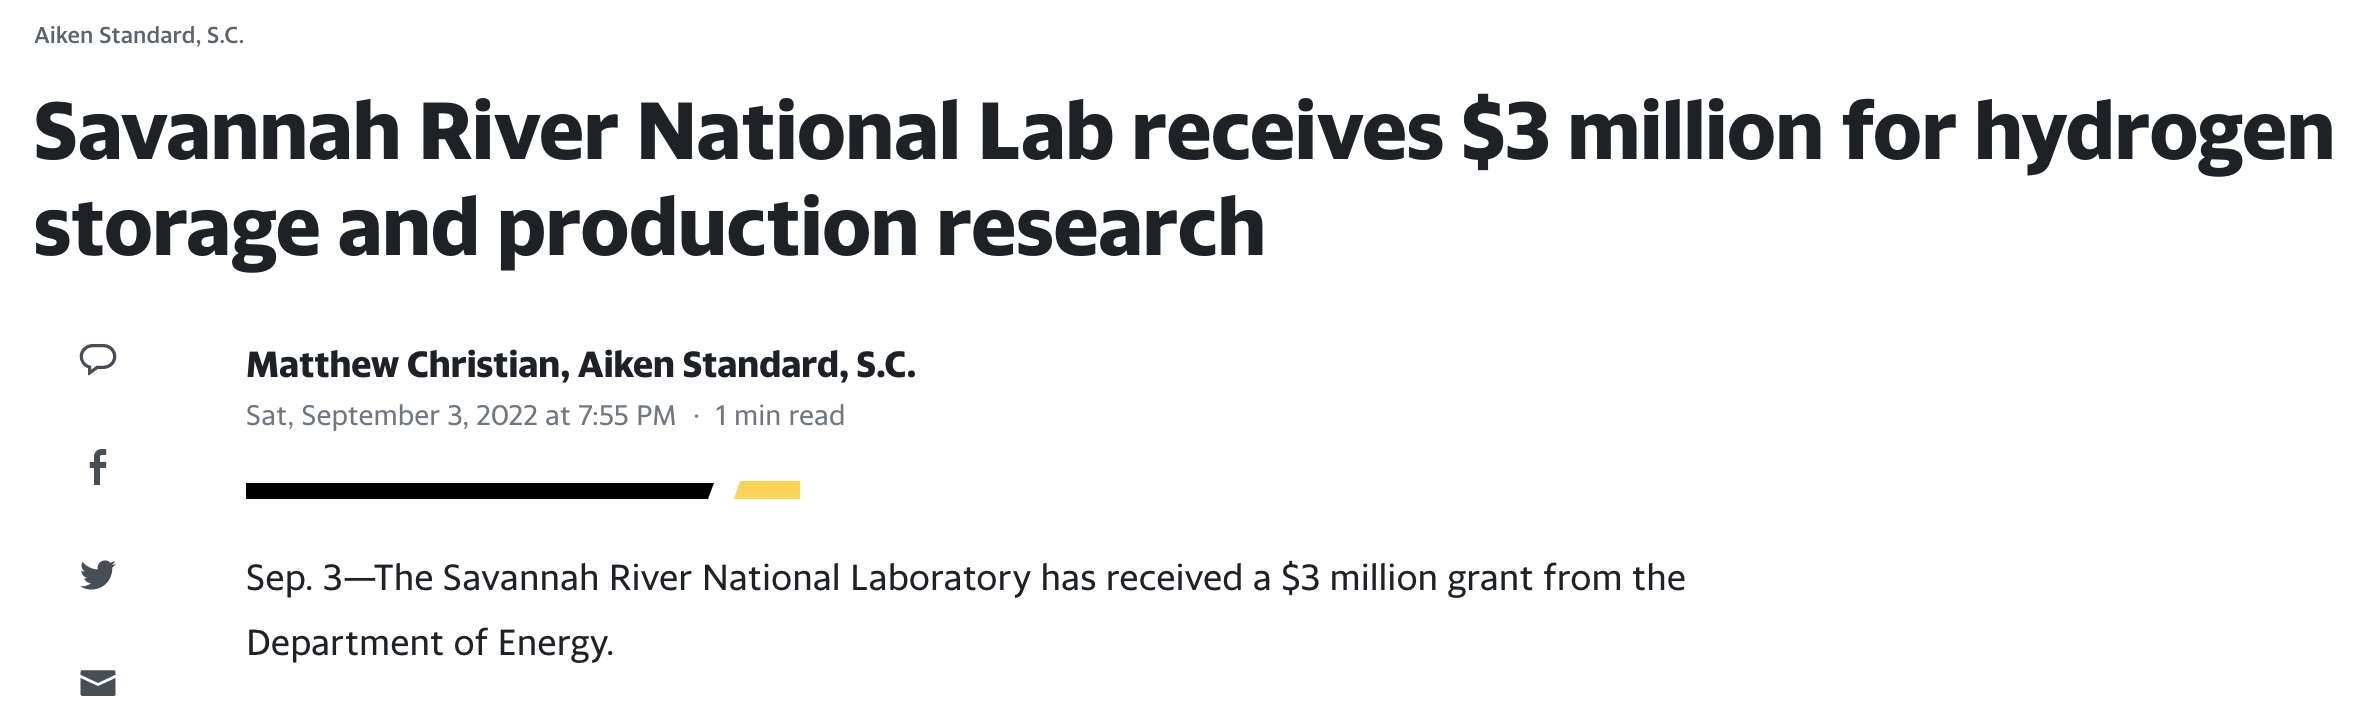 A.J. Drexel Nanomaterials Institute Part of $3M Award from the Dept of Energy to Savannah River National Laboratory